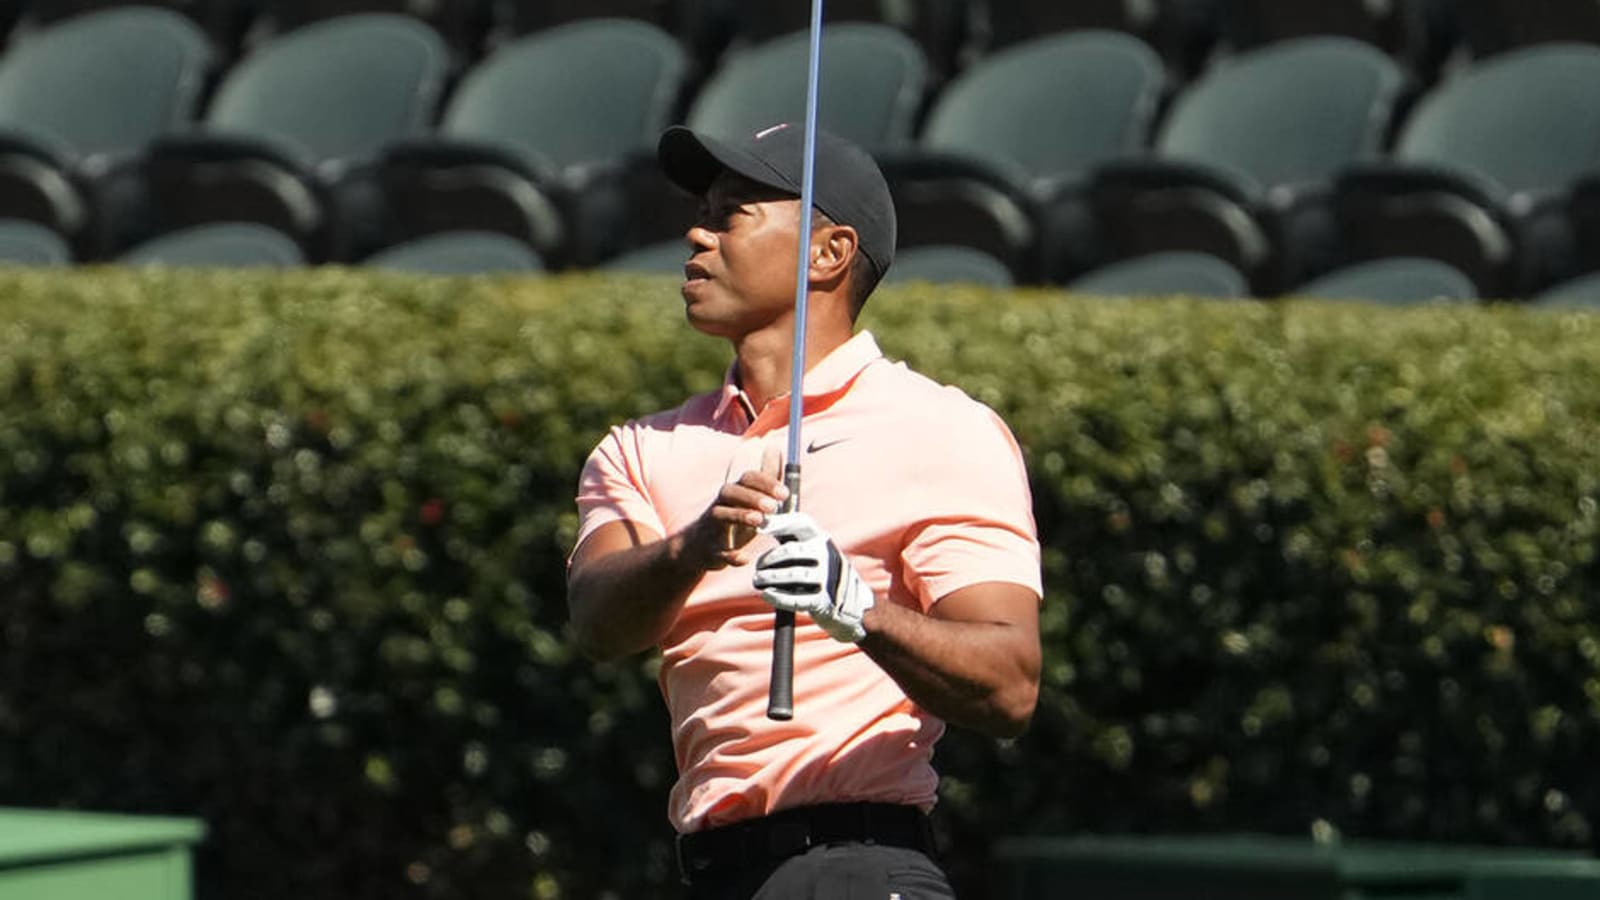 Tiger Woods impressing in practice ahead of Masters?